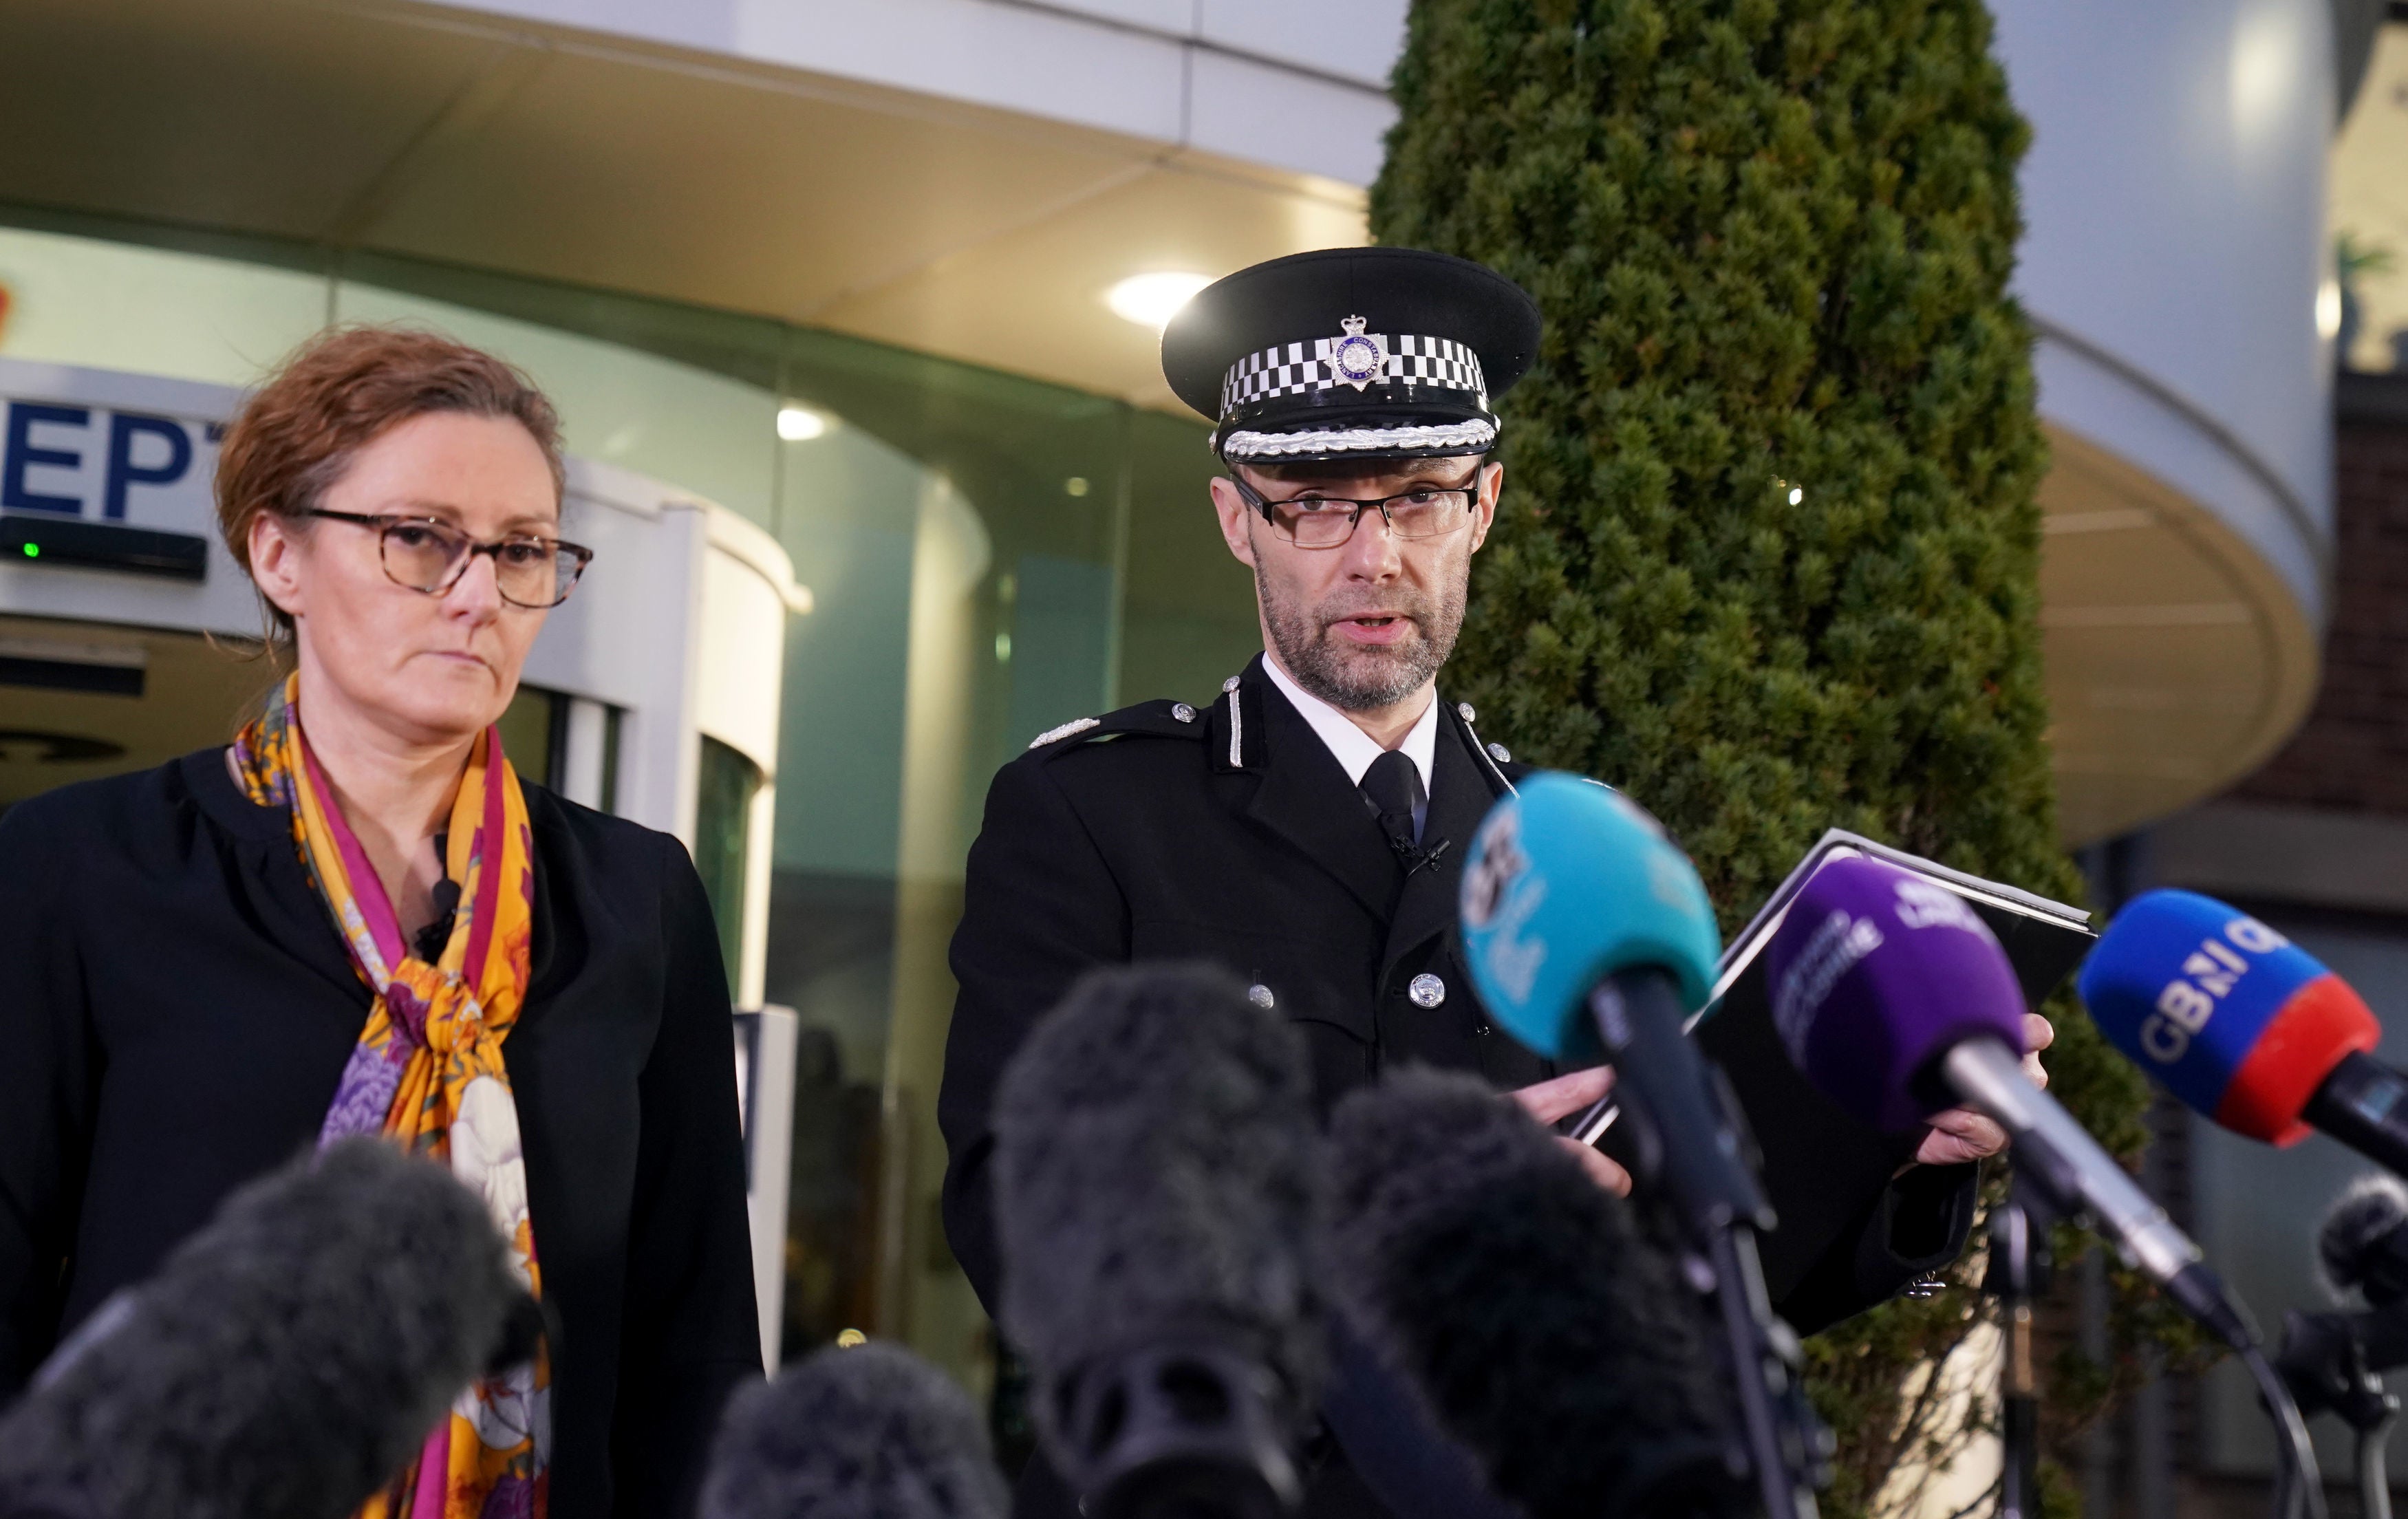 Assistant Chief Constable Peter Lawson of Lancashire Police with Detective Chief Superintendent Pauline Stables at the press conference on Monday